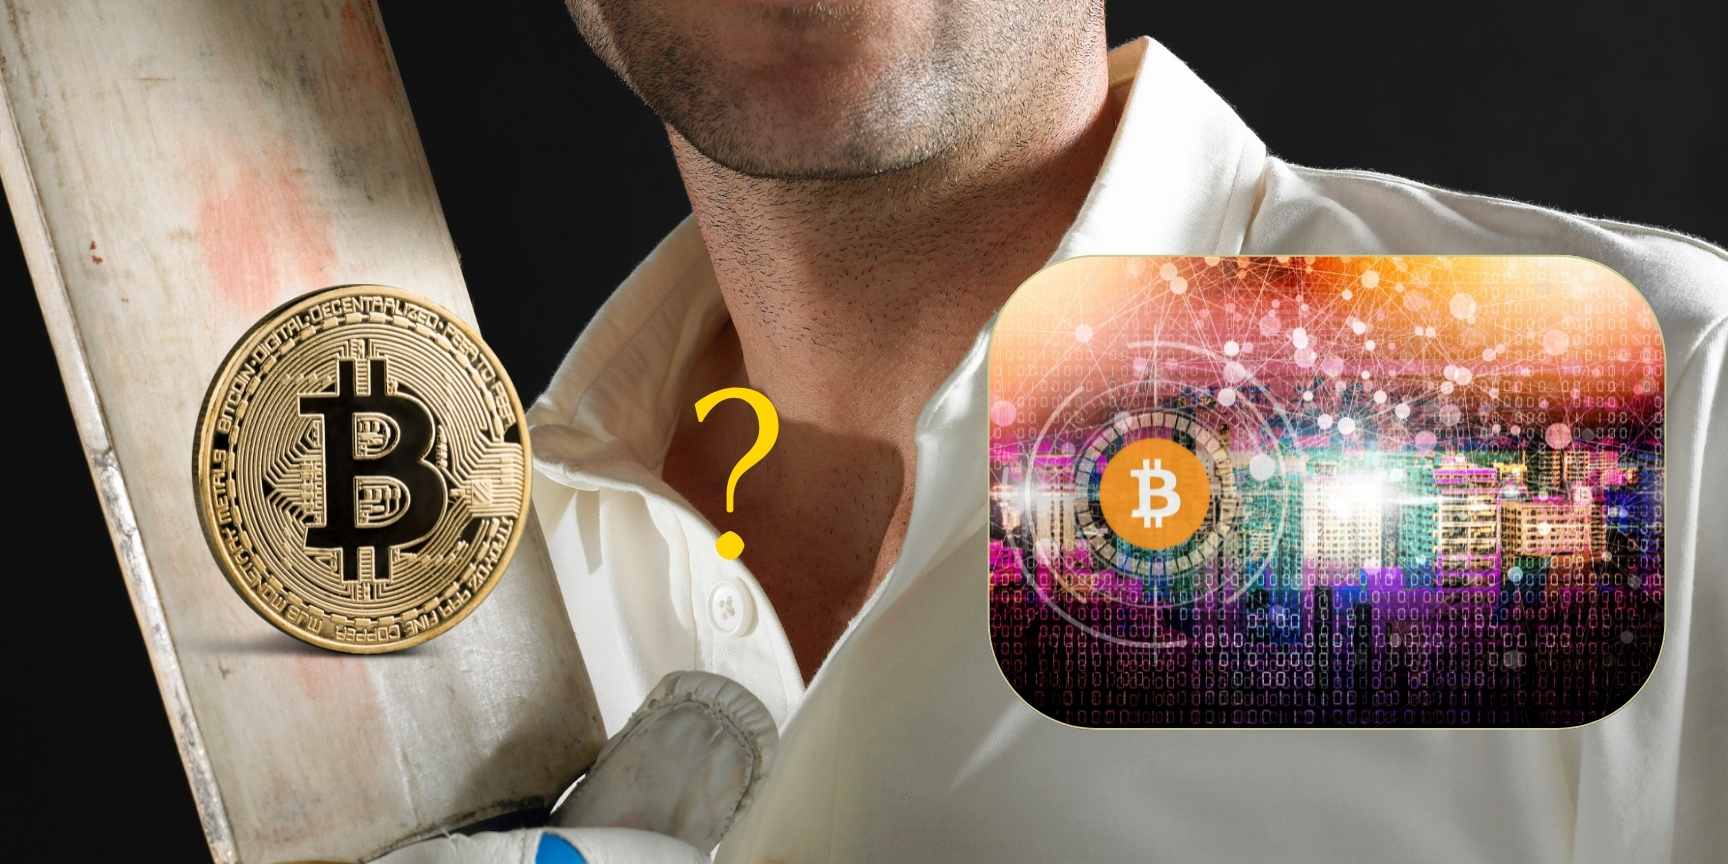 how to bet with bitcoin?